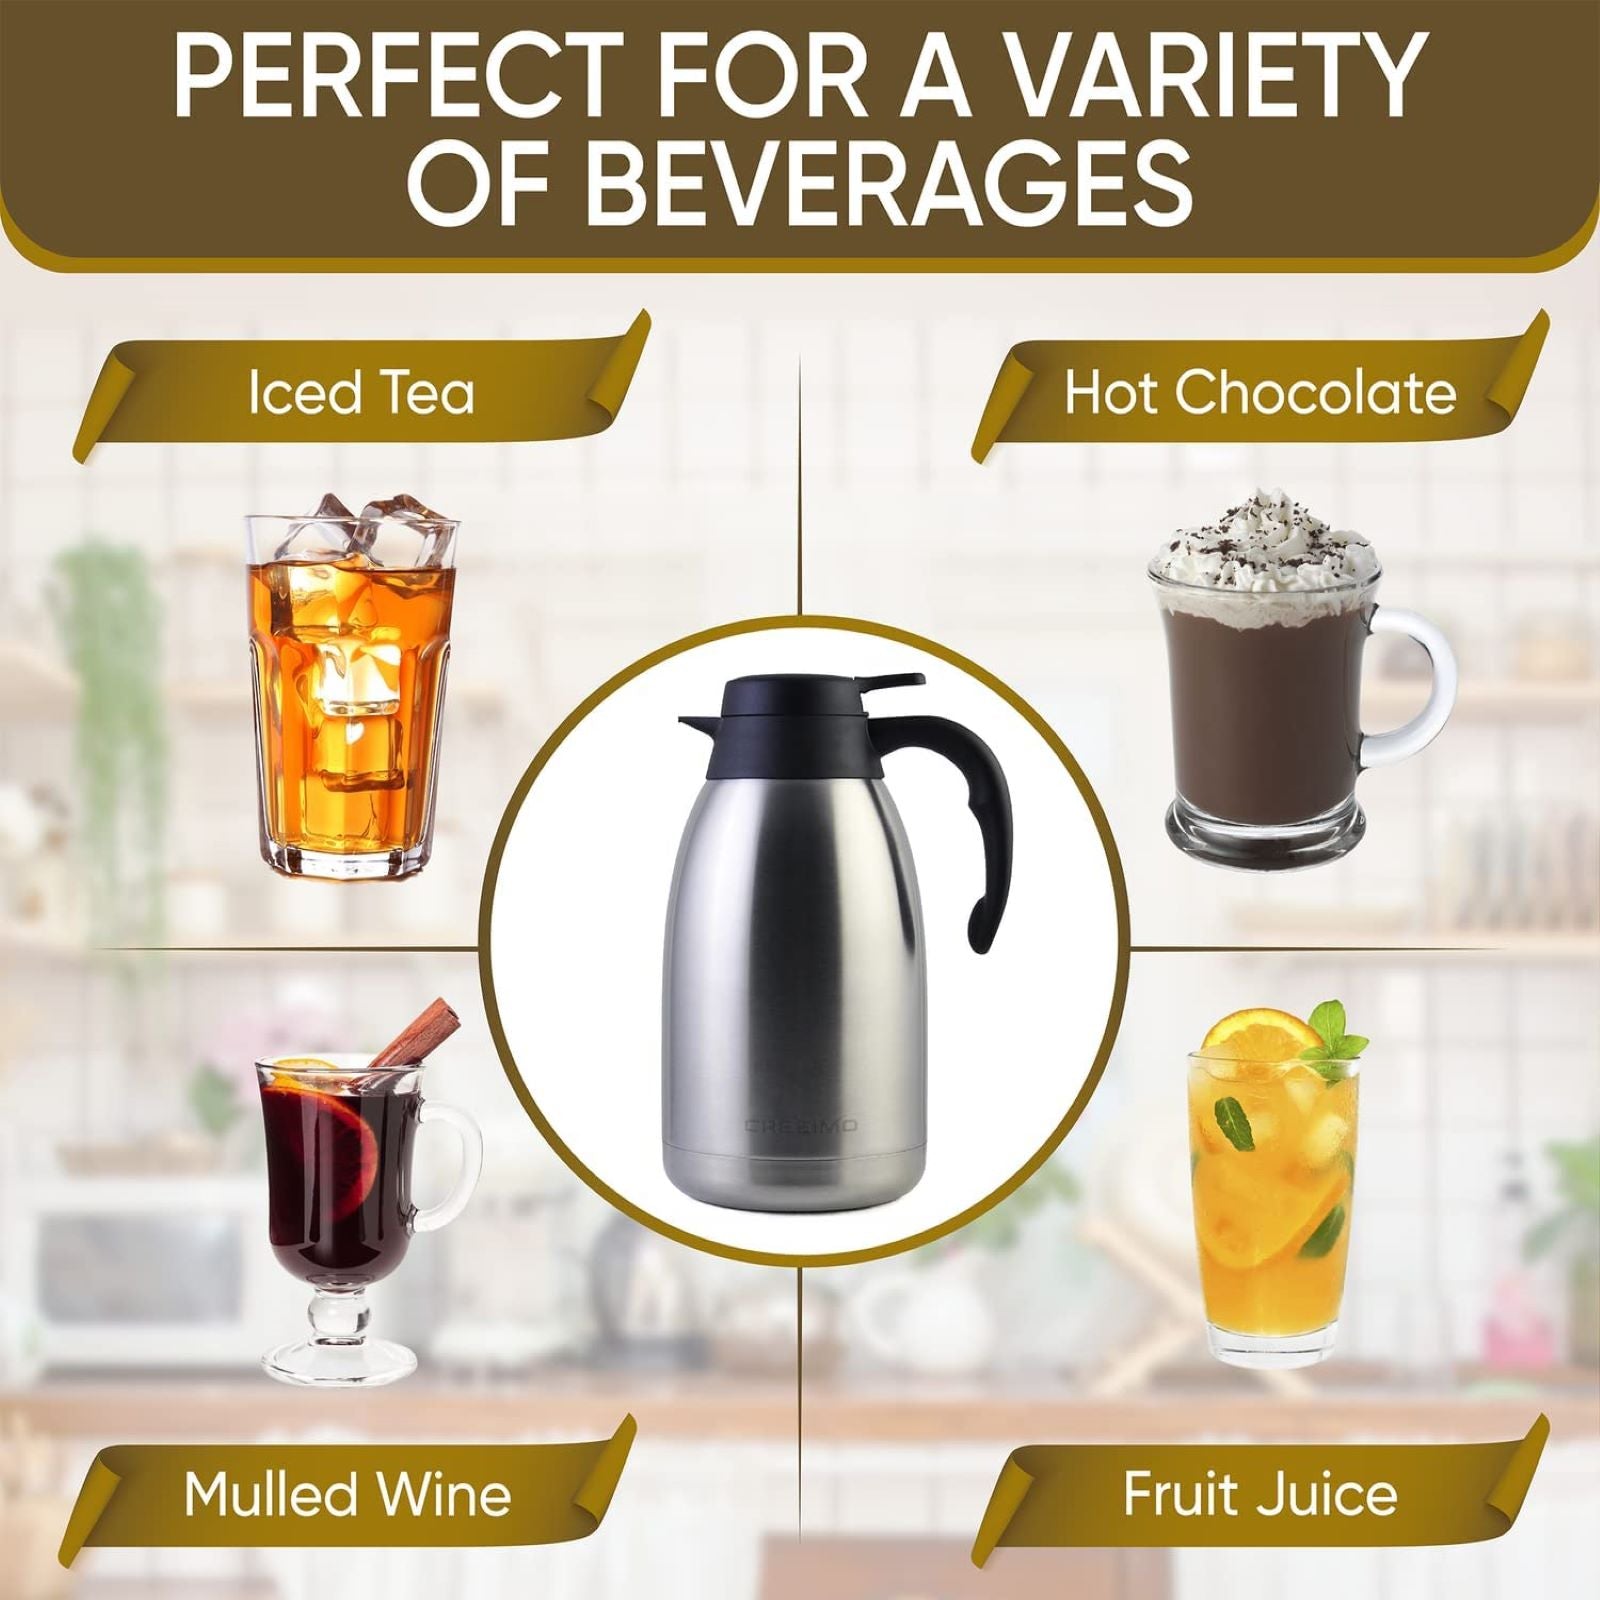 CRESIMO Thermal Coffee Carafe 68oz / 2L - 24 Hours Hot Beverage